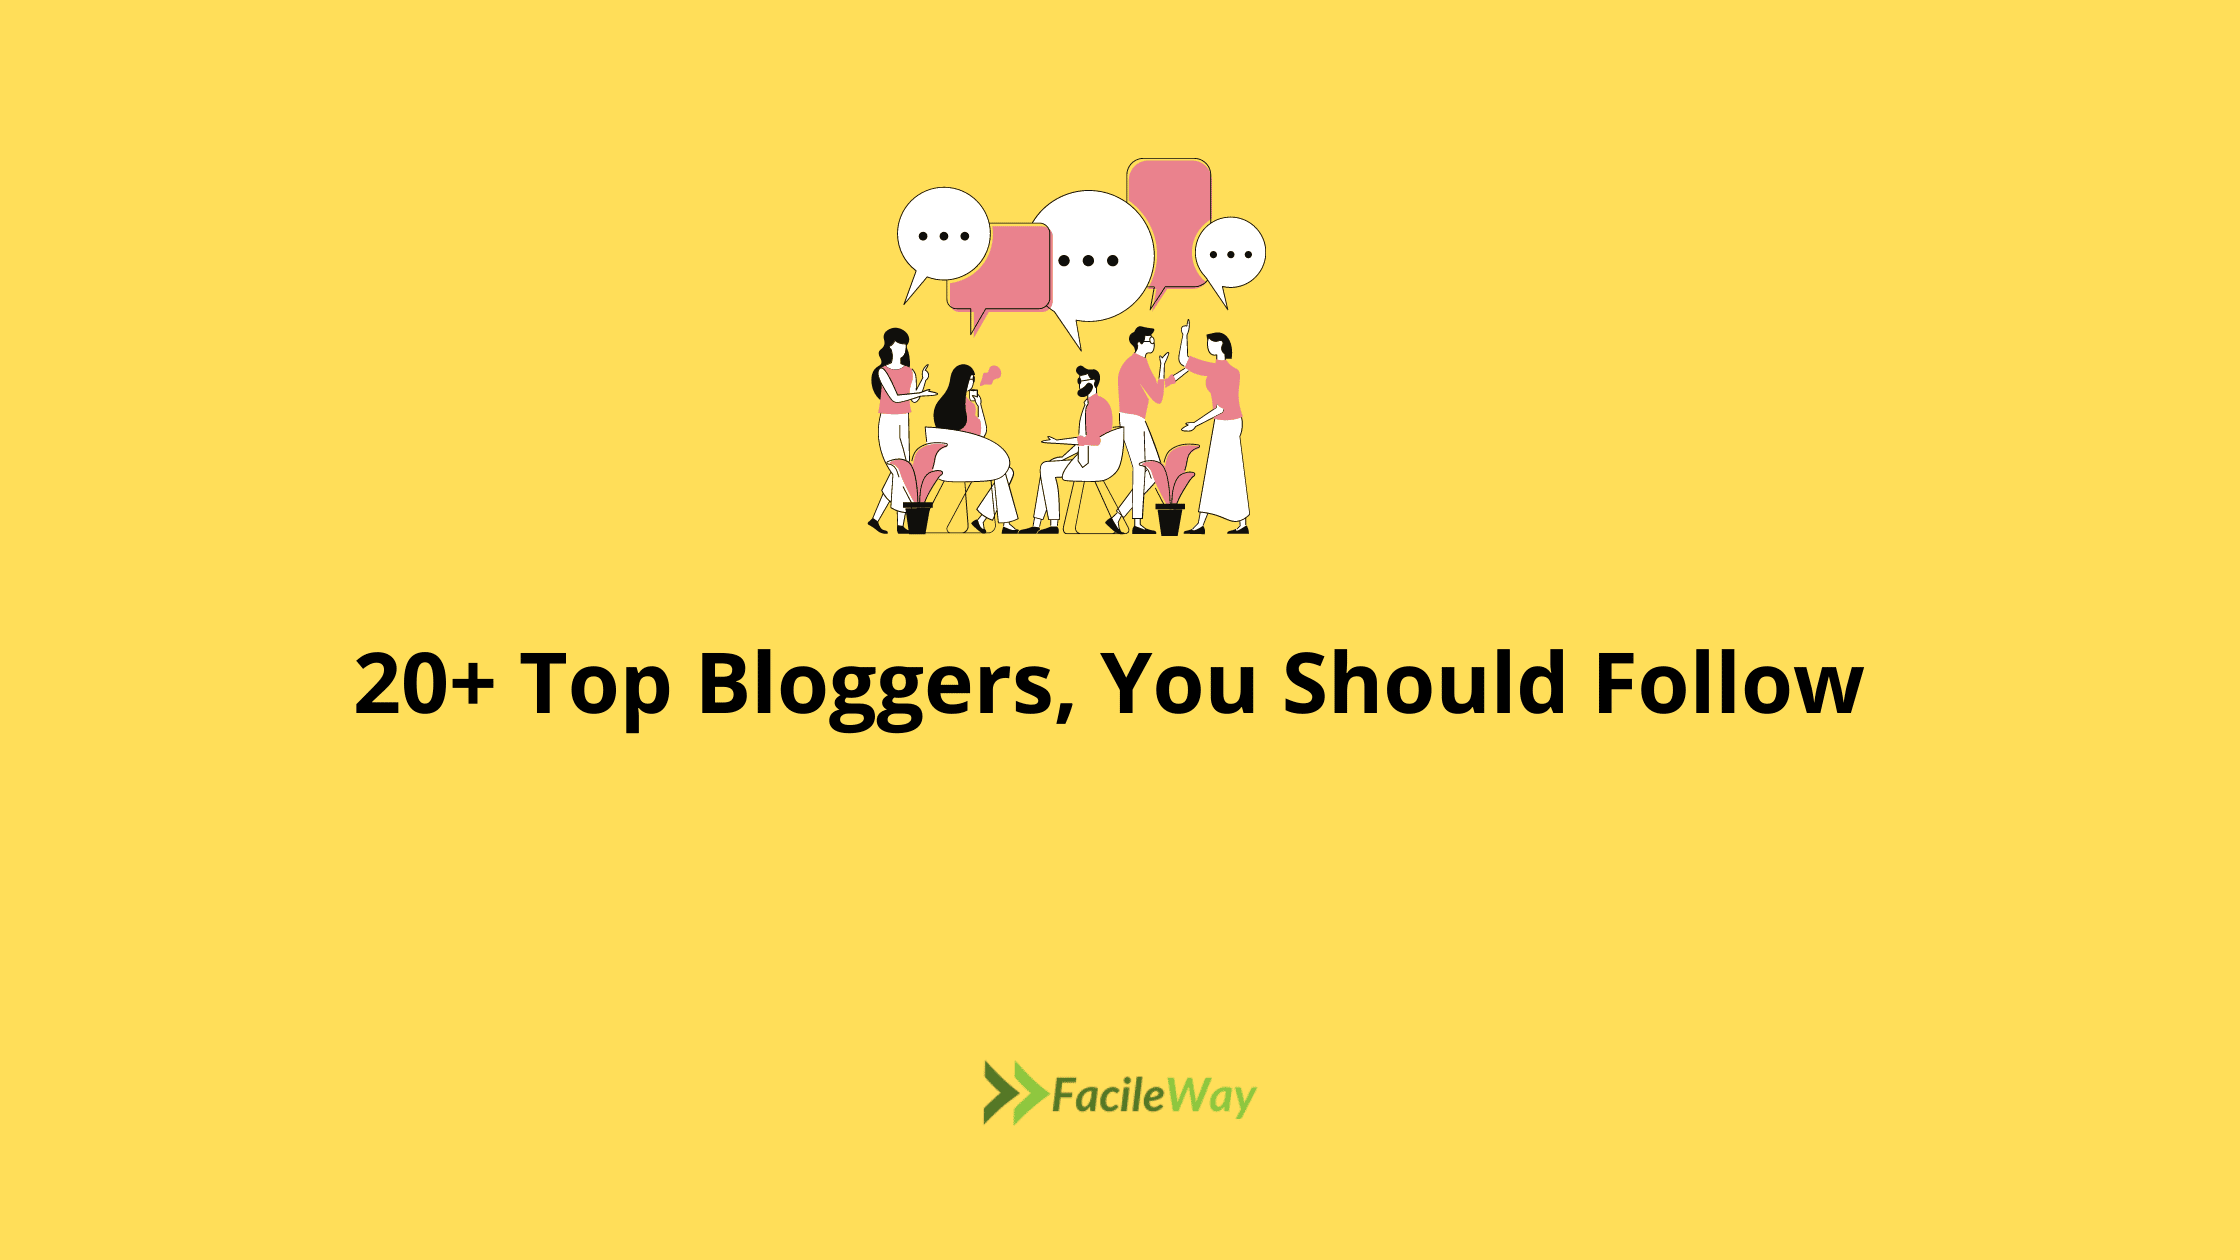 Top bloggers to follow